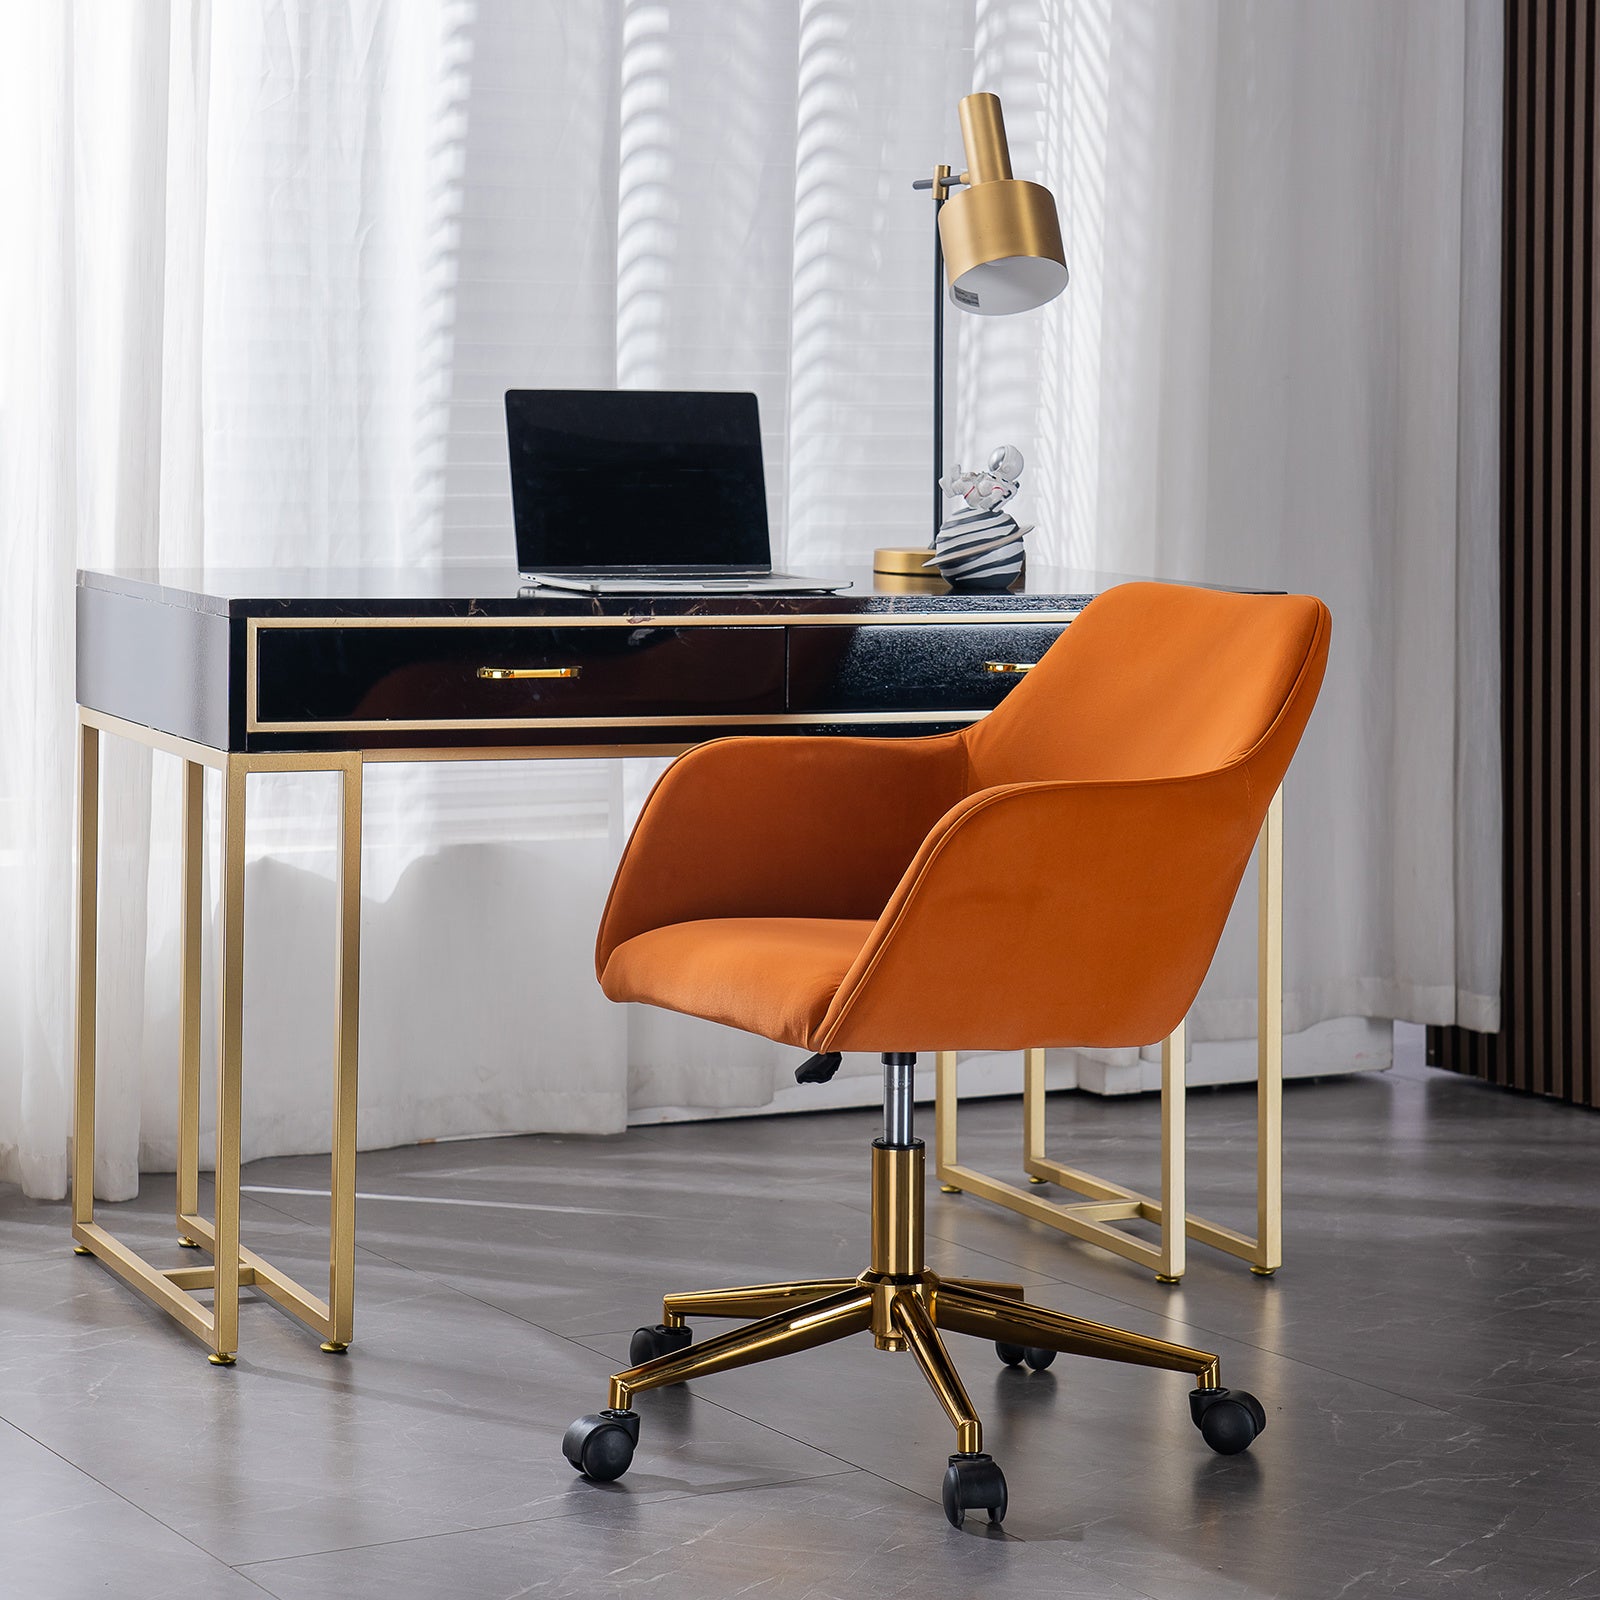 Modern Velvet Fabric Material Adjustable Height 360 revolving Home Office Chair with Gold Metal Legs and Universal Wheels; Orange